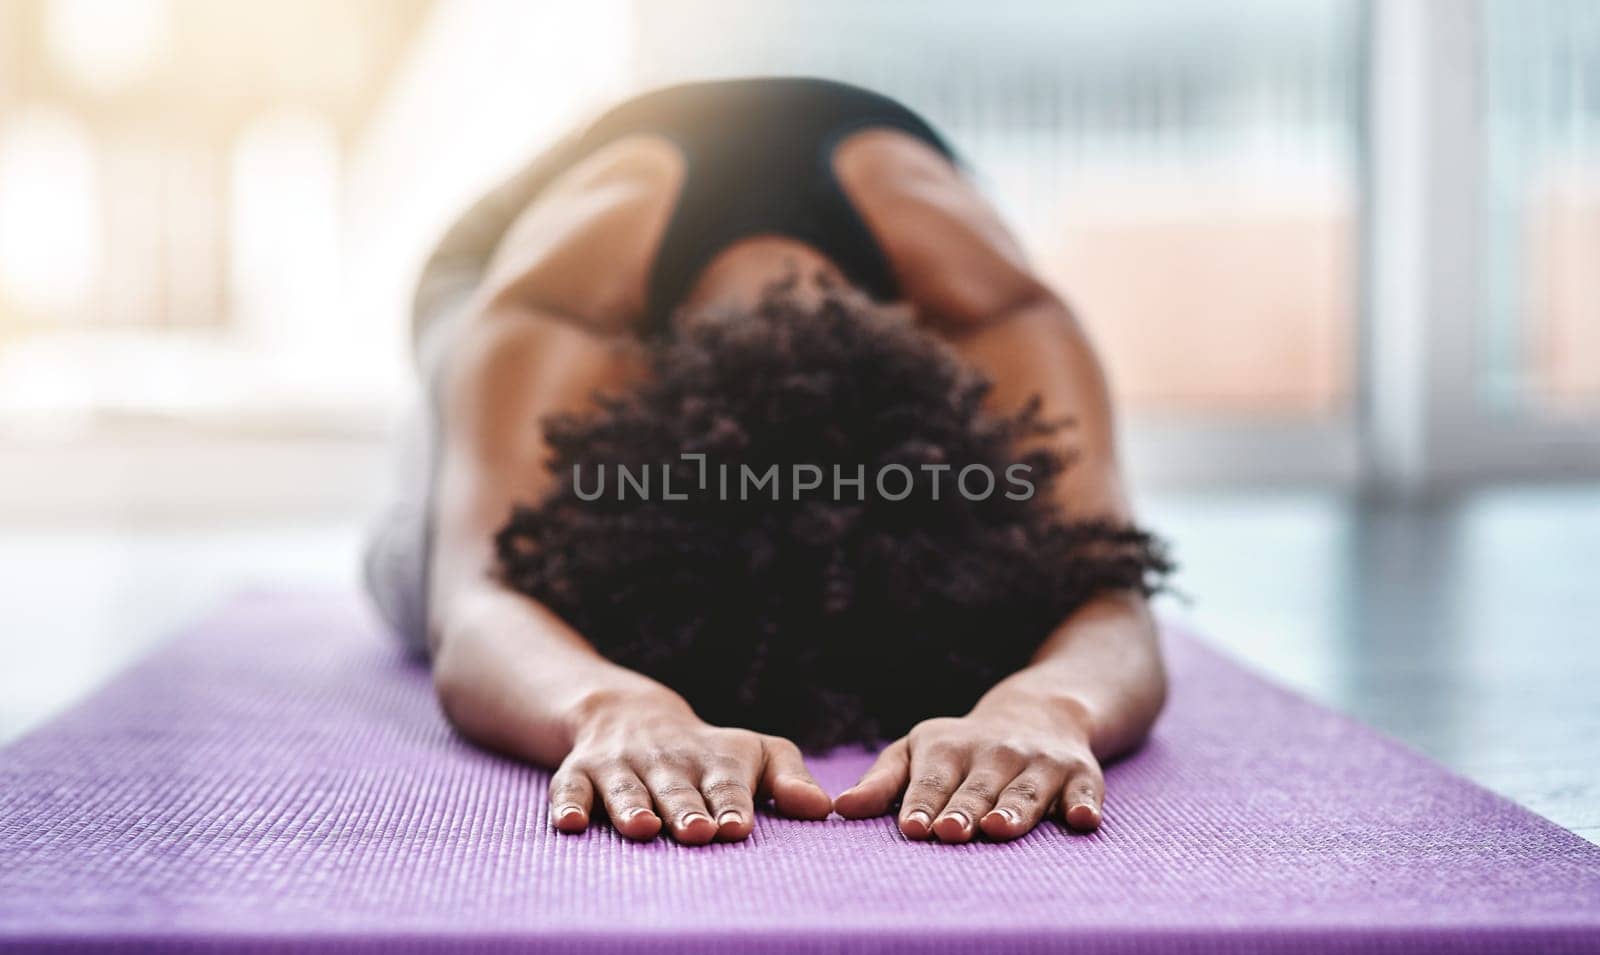 Yoga, fitness and wellness with a woman in studio on an exercise mat for inner peace or to relax. Health, exercise and zen with a female athlete or yogi in the childs pose for balance or awareness by YuriArcurs